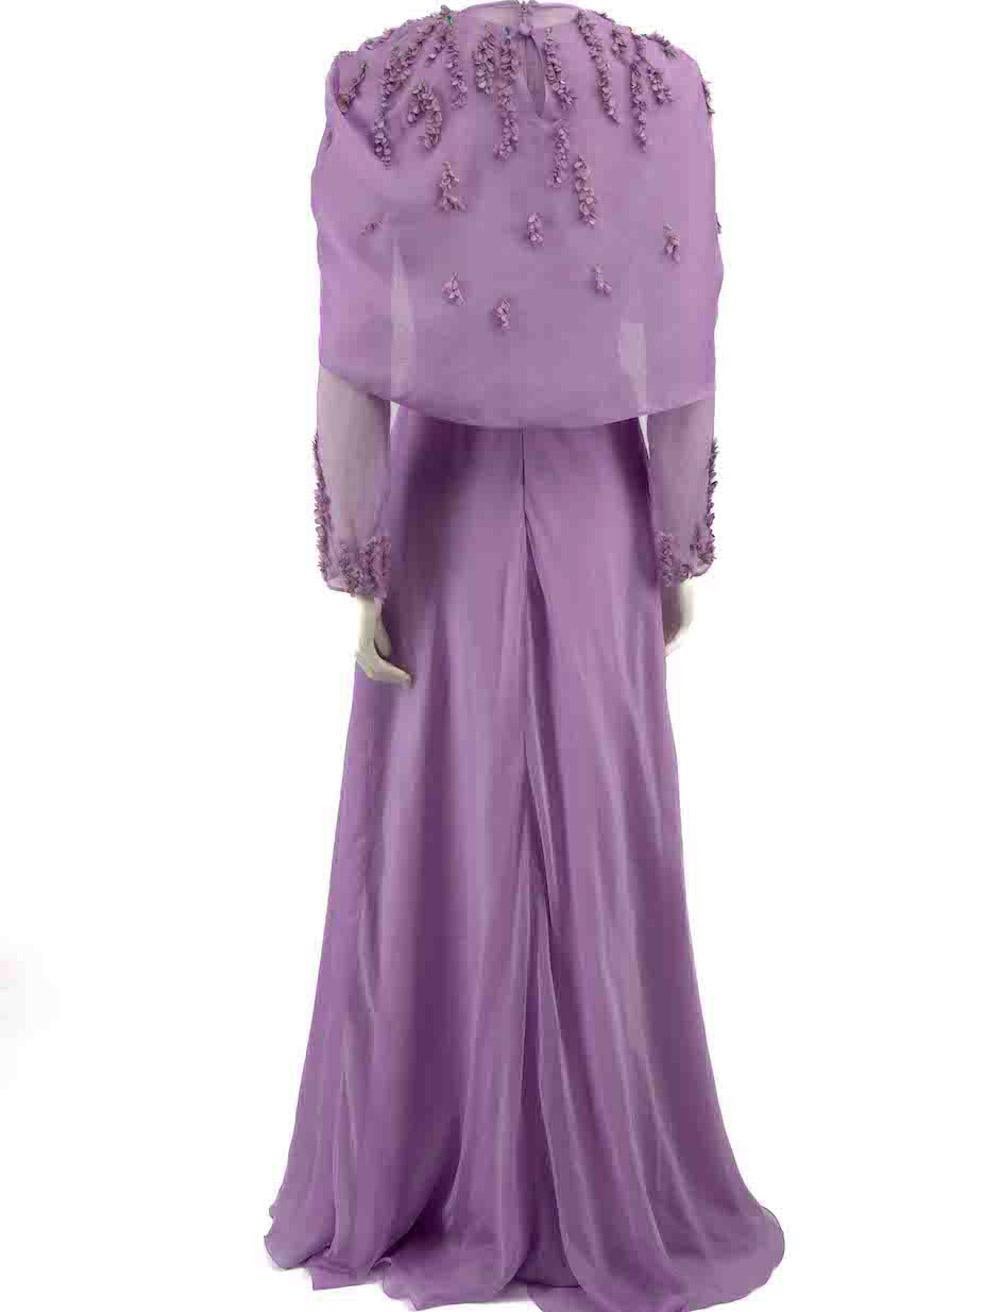 Honayda Purple Flower Embroidered Cape Maxi Dress Size M In Good Condition For Sale In London, GB